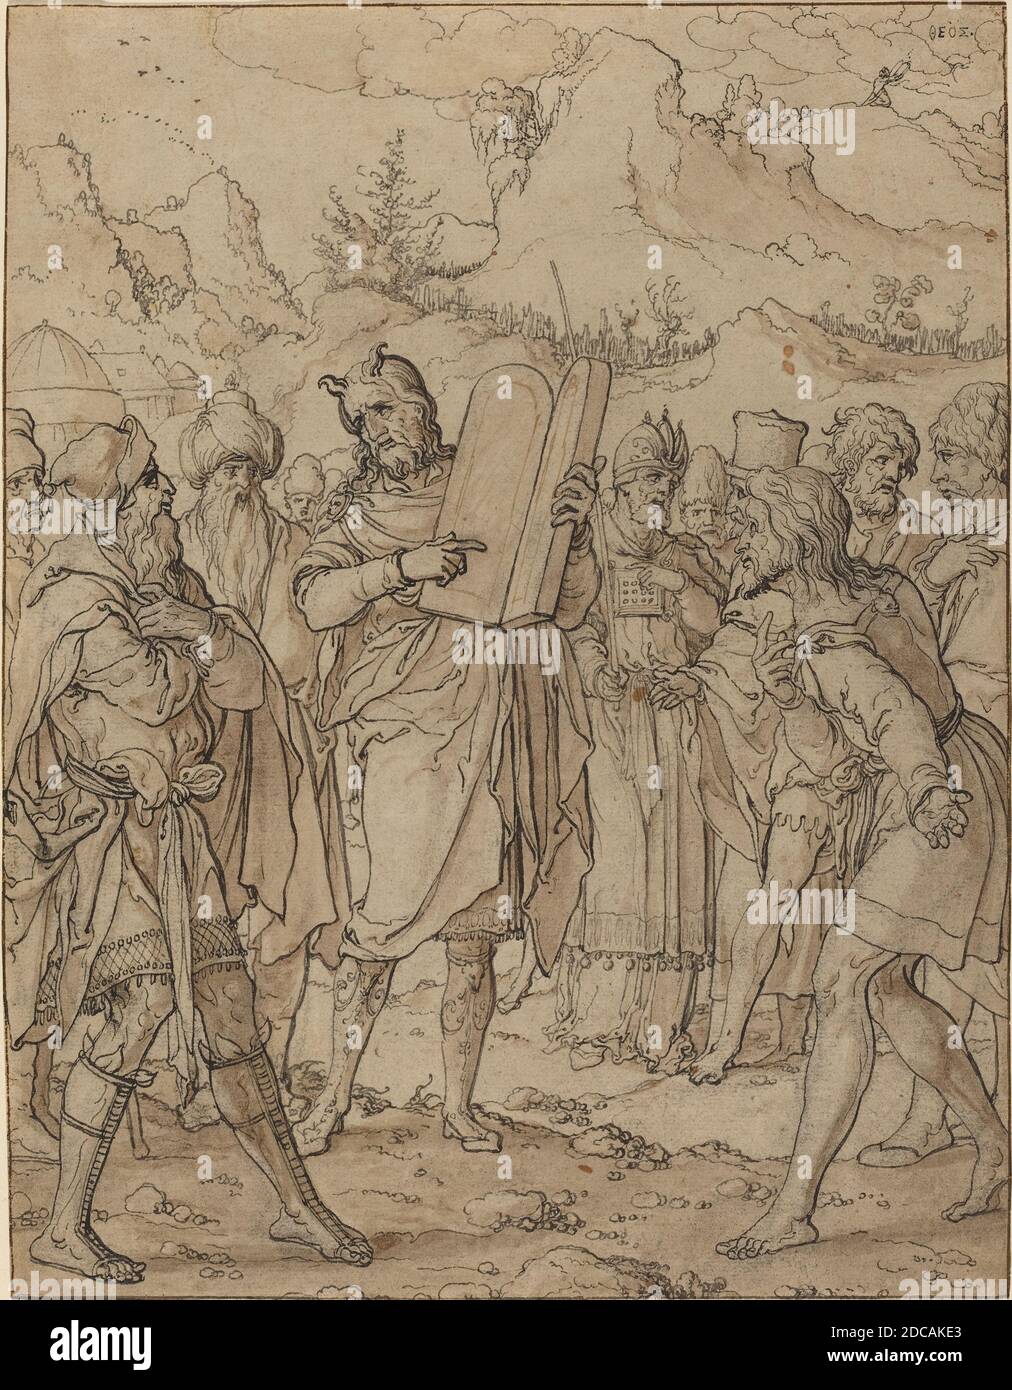 Jan Swart van Groningen, (artist), Dutch, c. 1500 - 1553 or after, Moses Delivering God's Commandments to the Israelites, pen and black ink and brown wash on laid paper, overall: 25.9 x 20 cm (10 3/16 x 7 7/8 in Stock Photo